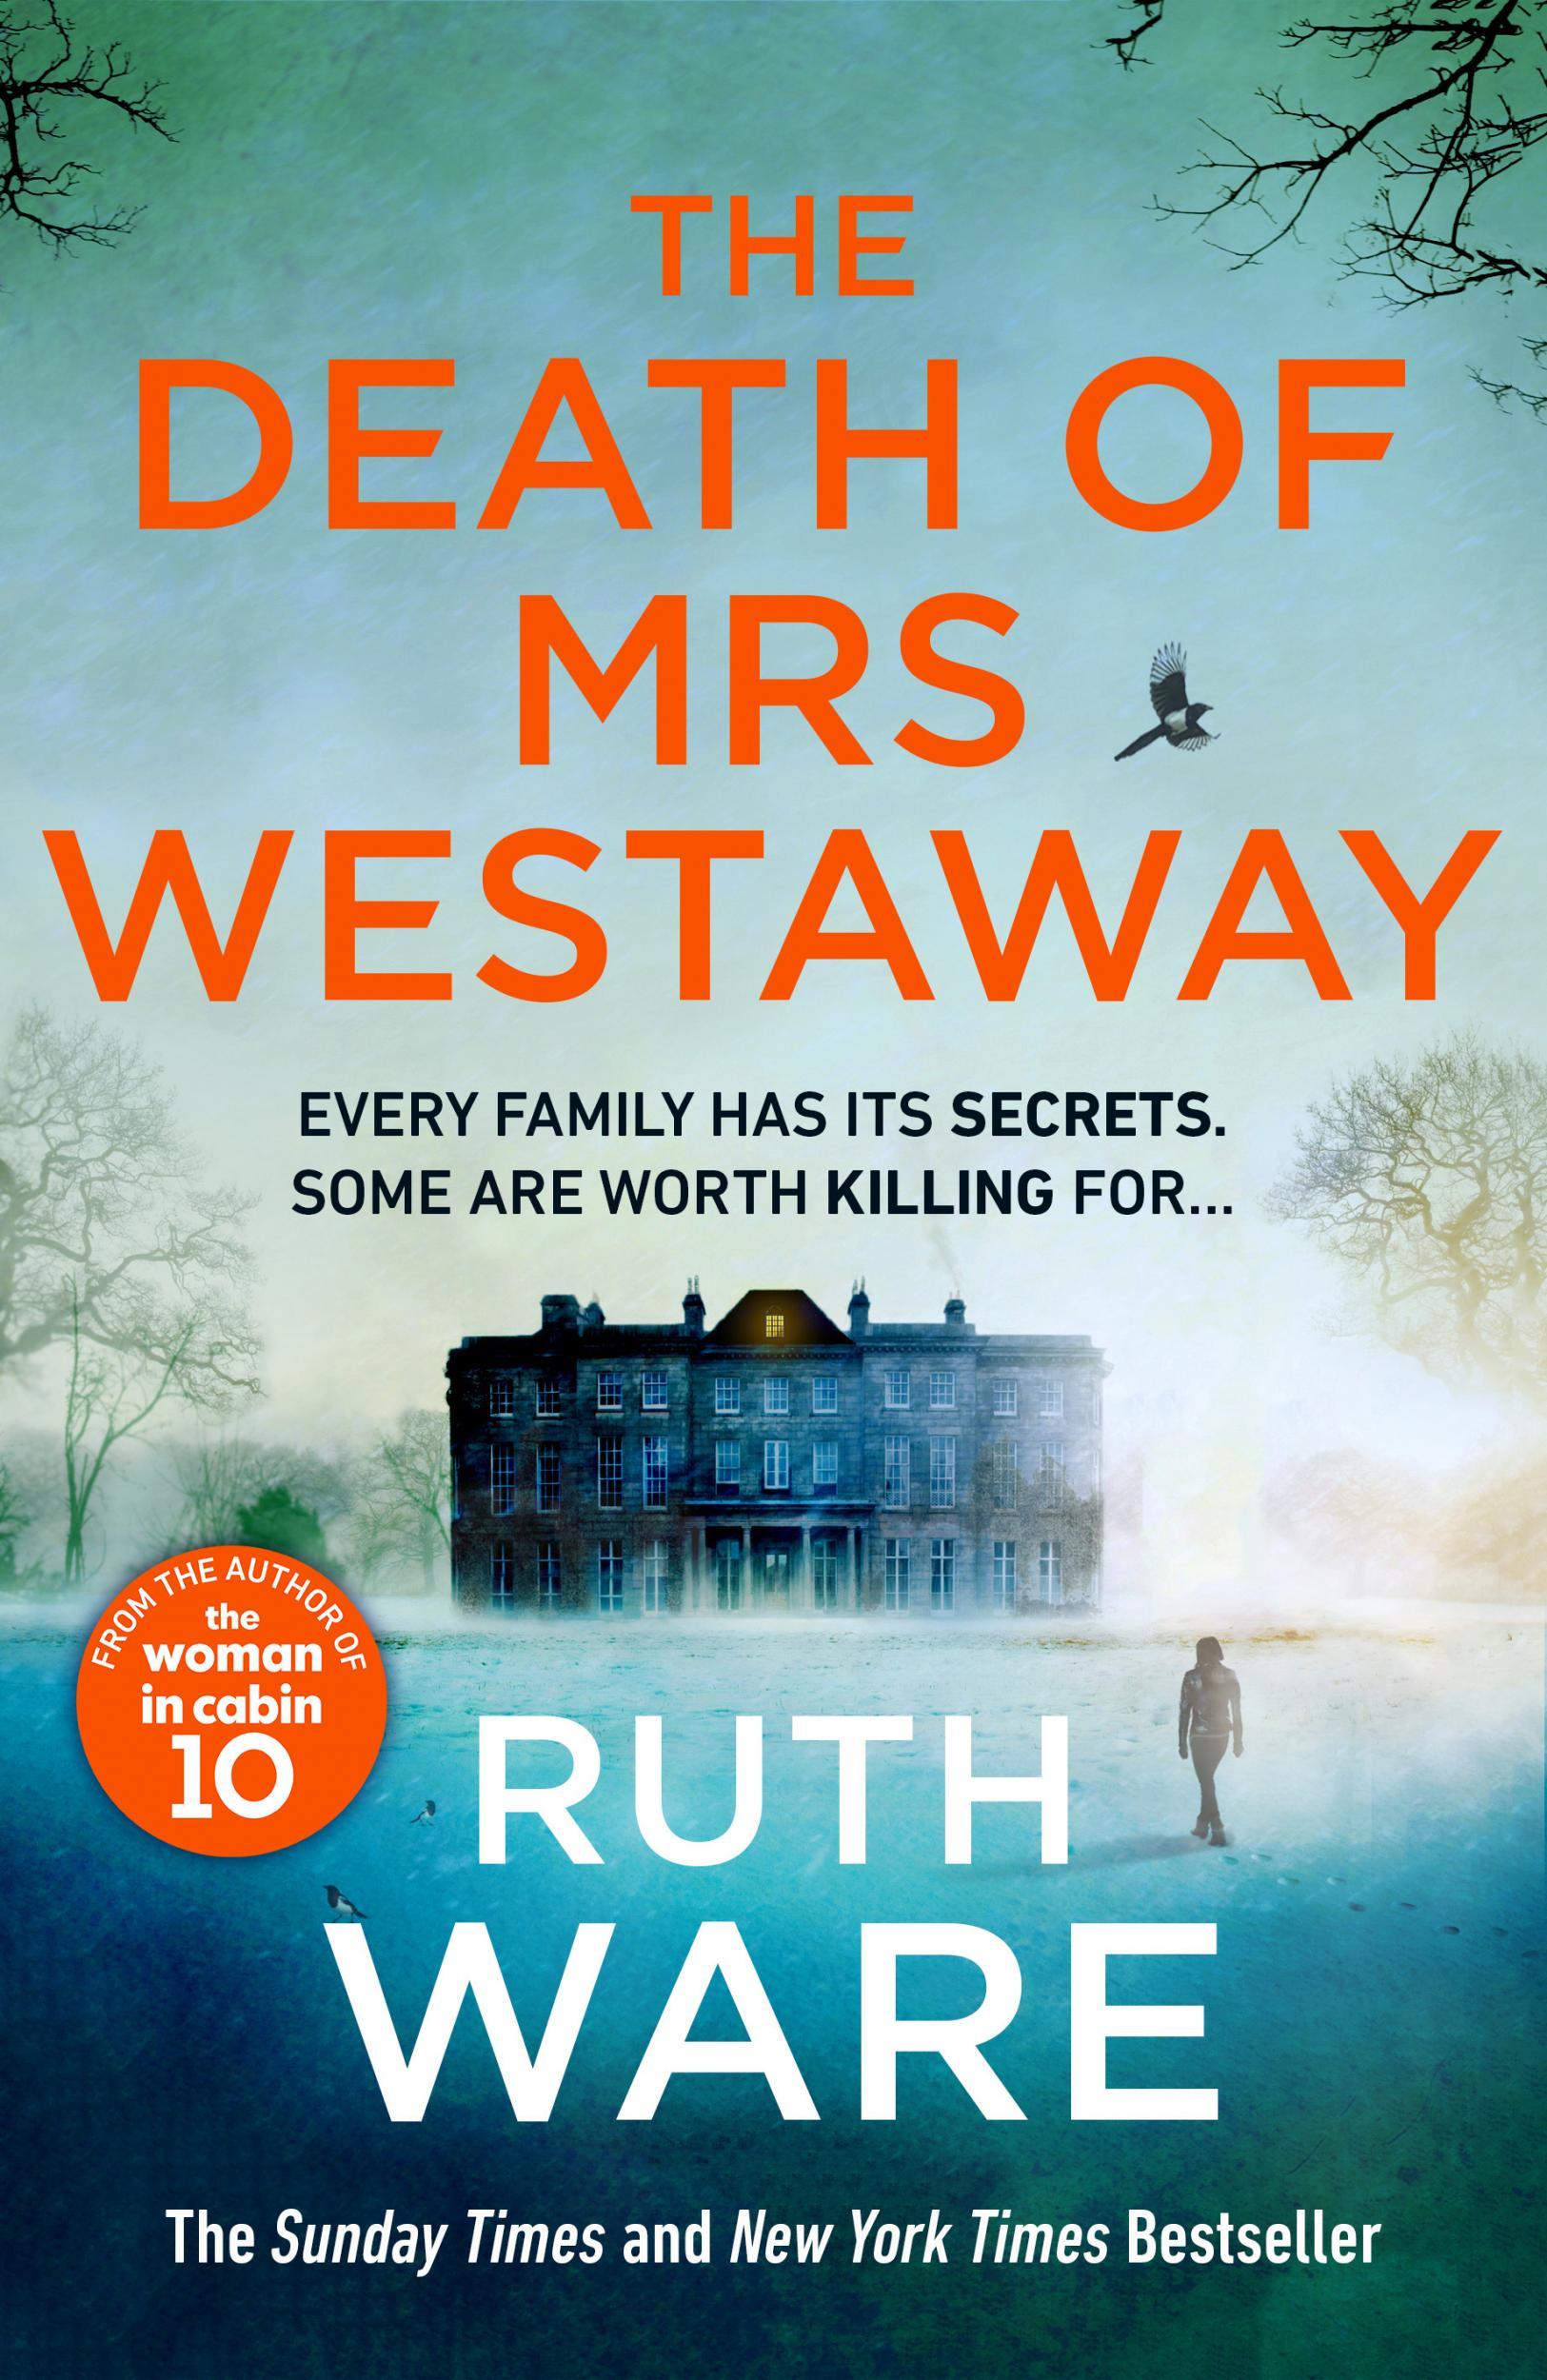 the death of mrs westaway book review